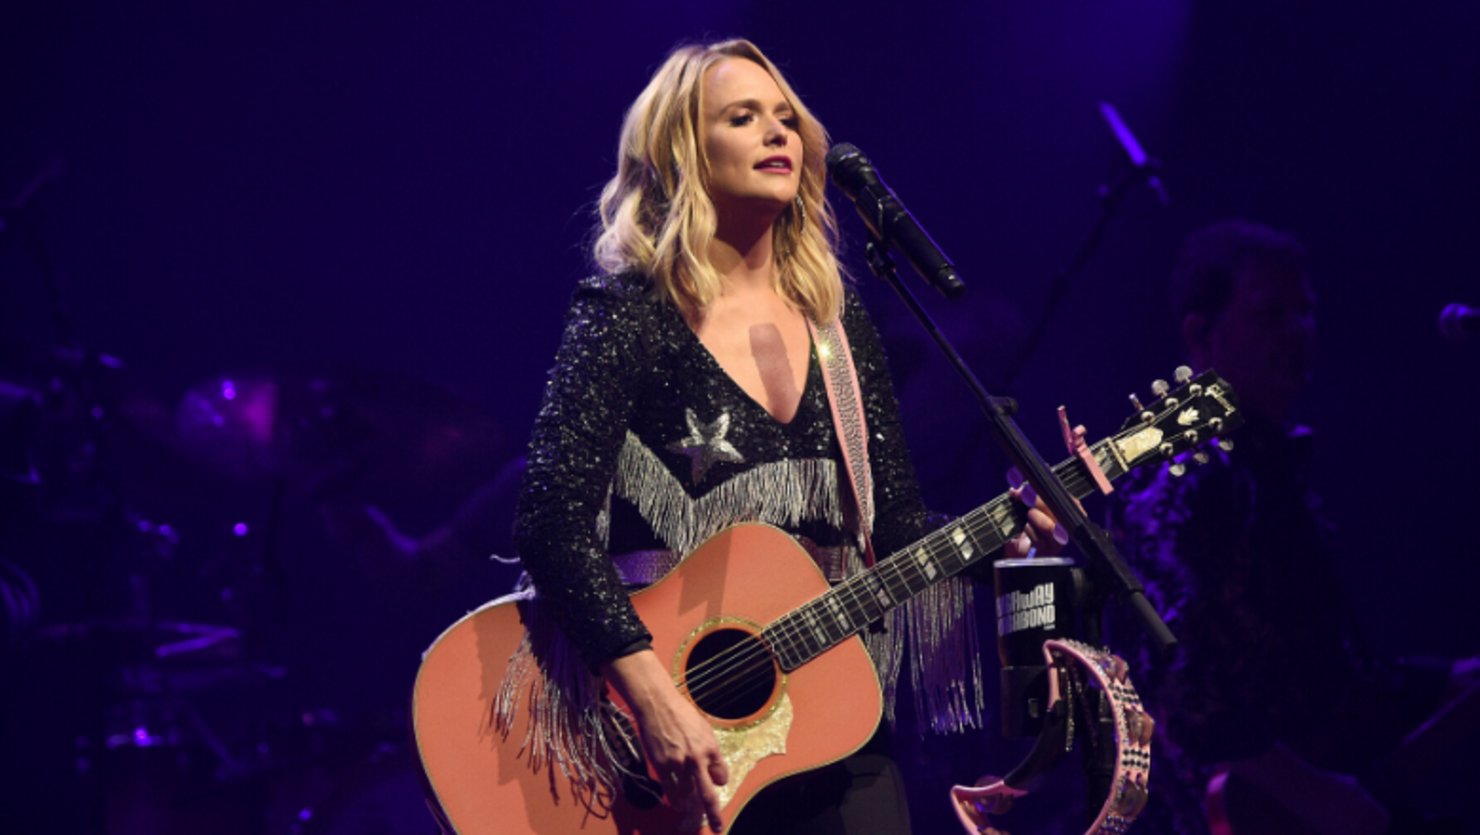 Miranda Lambert Invites 8-Year-Old Fan To Sing On Stage With Her